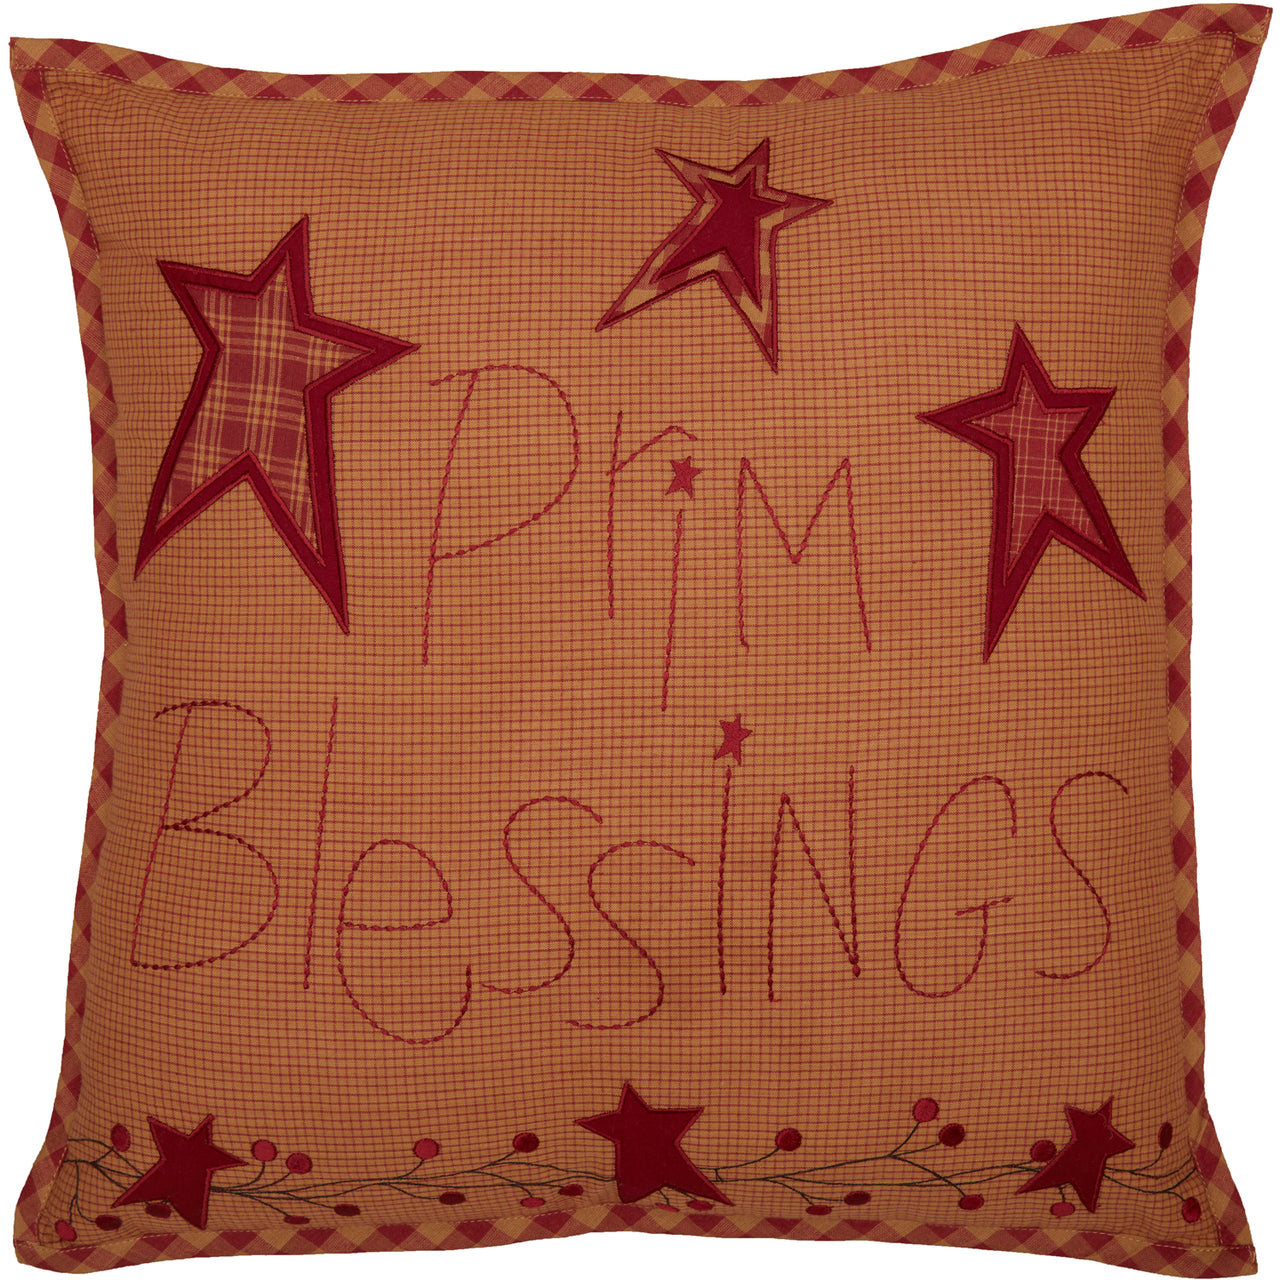 Ninepatch Star Prim Blessings Pillow 18x18VHC Brands